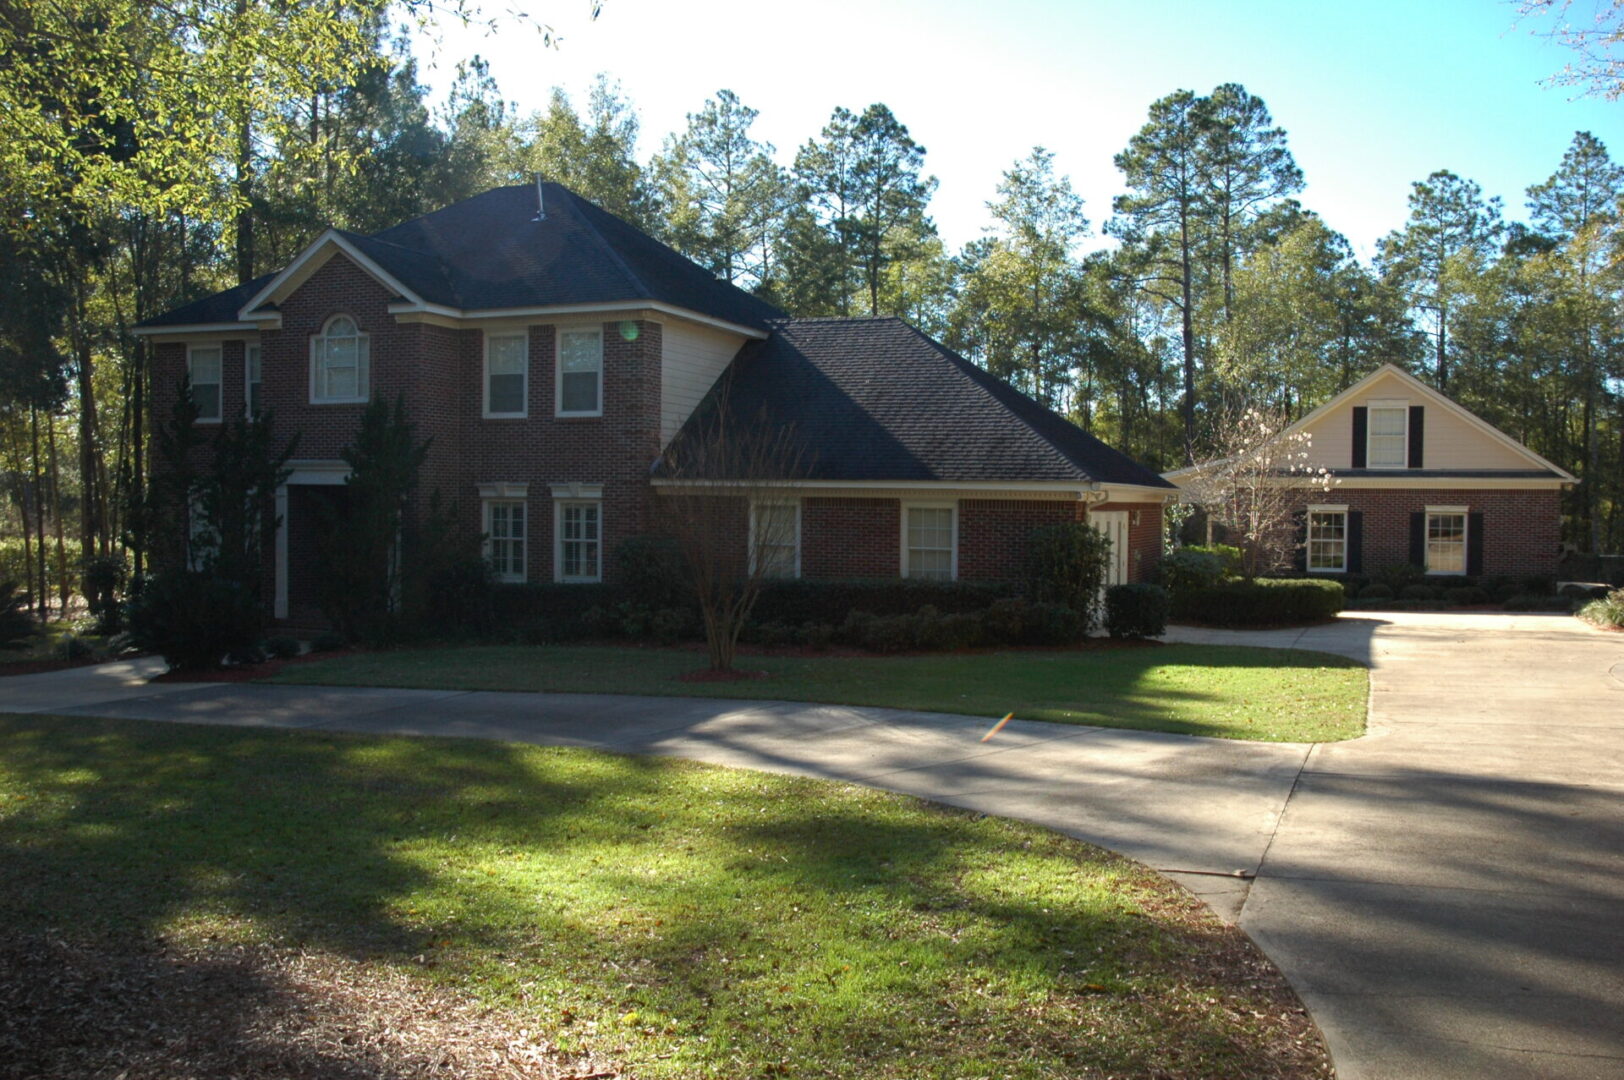 A large brick house with a driveway in front of it.